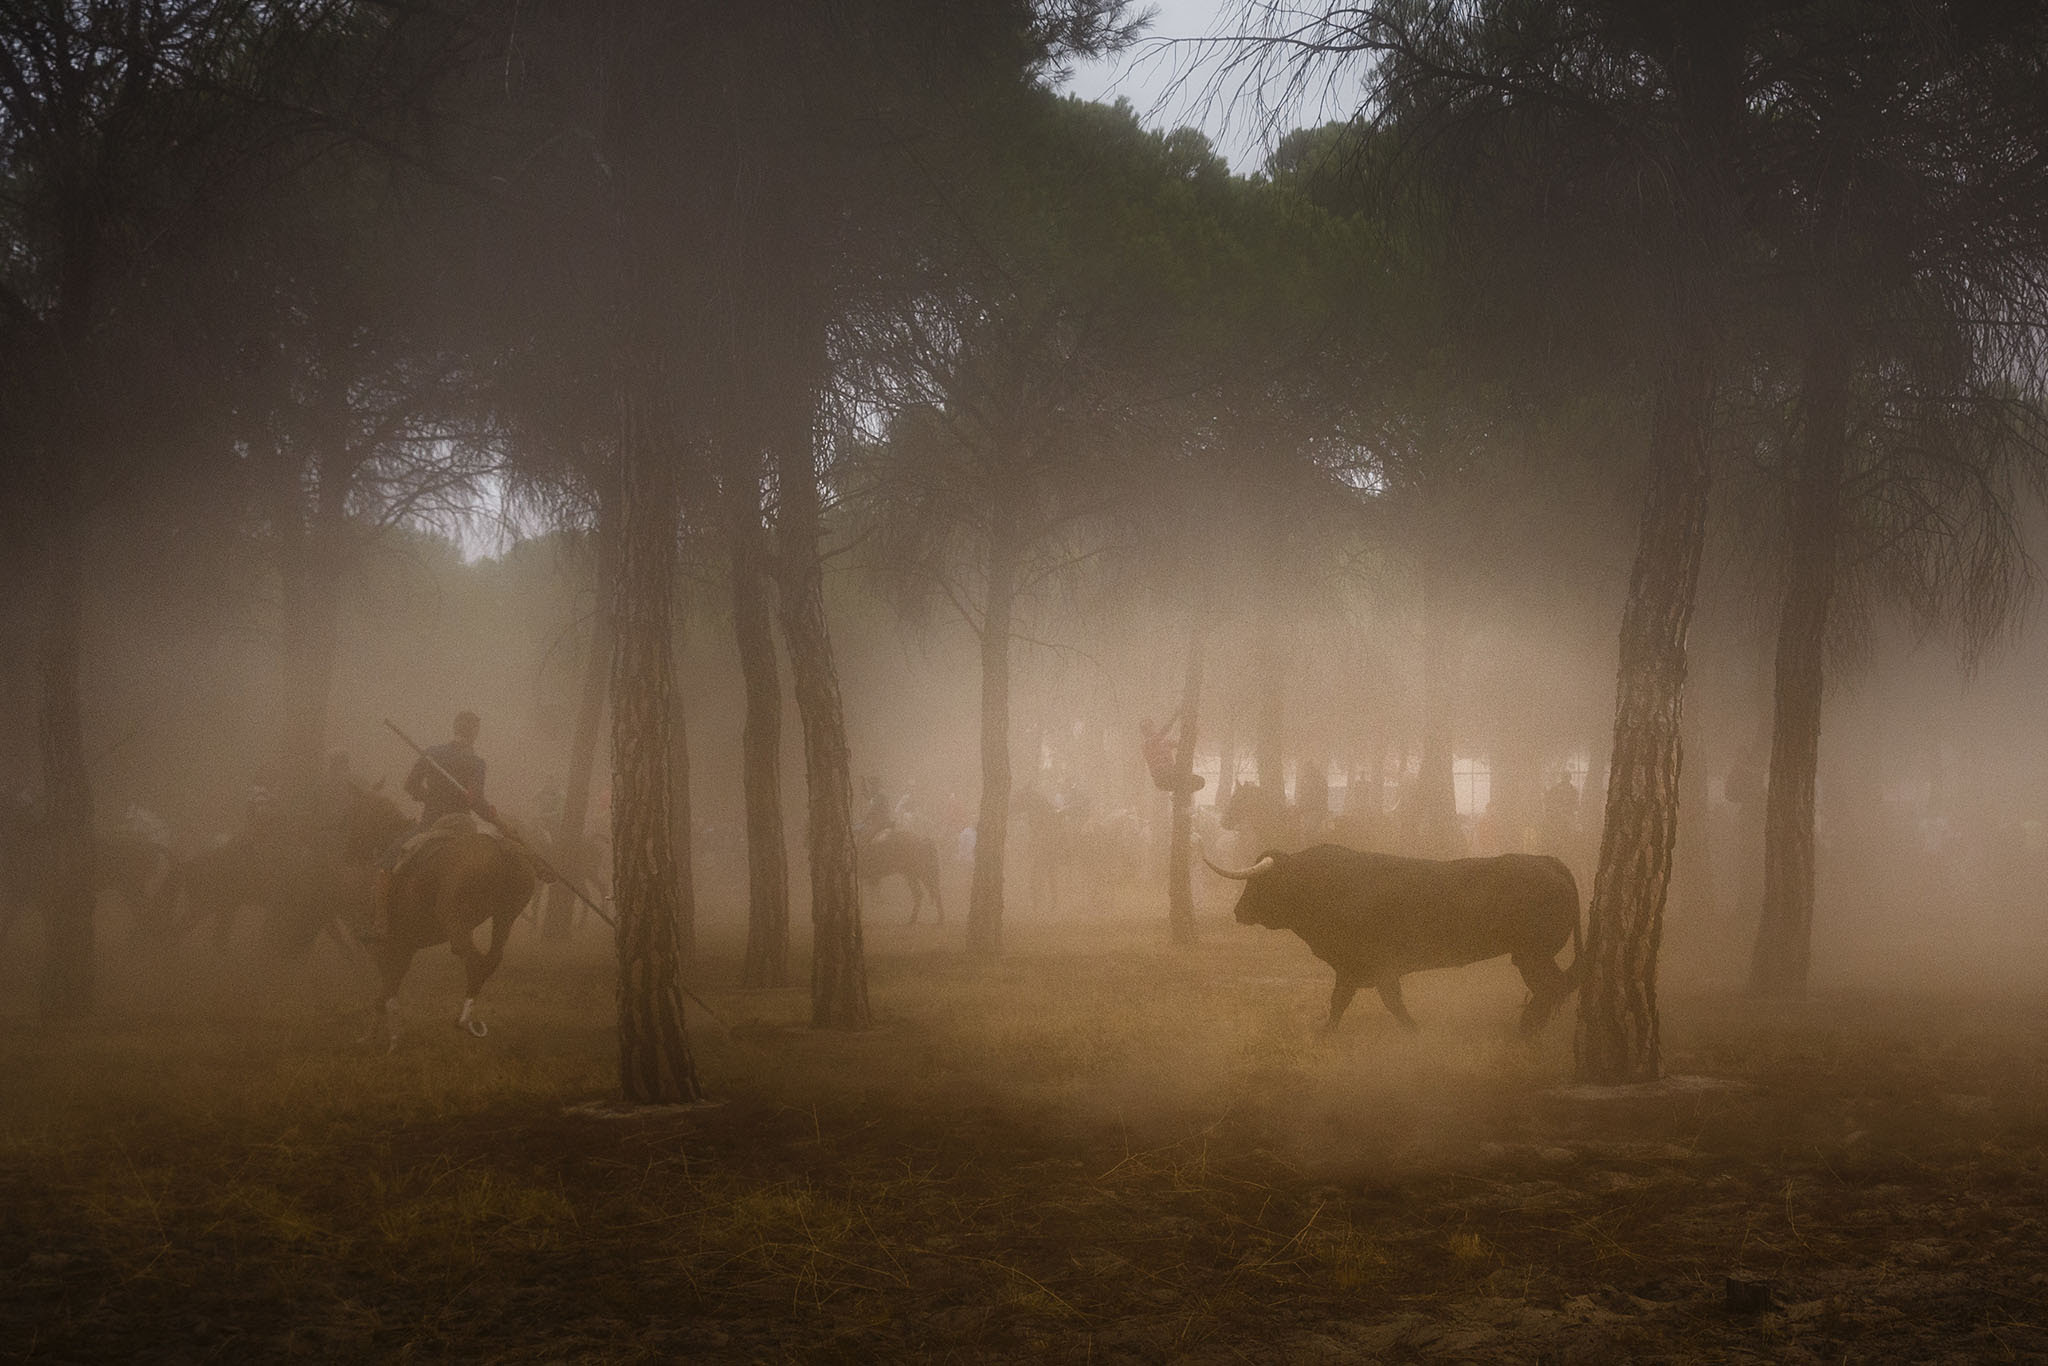 Men on horseback ride trough a pine tree forest chased by a a brave bull in Tordesillas, Spain, Tuesday, Sept. 13, 2016 . Men on horseback and on foot traditionally have chased the bull and speared it in front of thousands of onlookers in what became known as one of Spain's goriest spectacles, but amid increasing protests by animal rights activists the regional government last year banned the killing of bulls at town festivals, though traditional bullfights were not affected. (AP Photo/Daniel Ochoa de Olza)